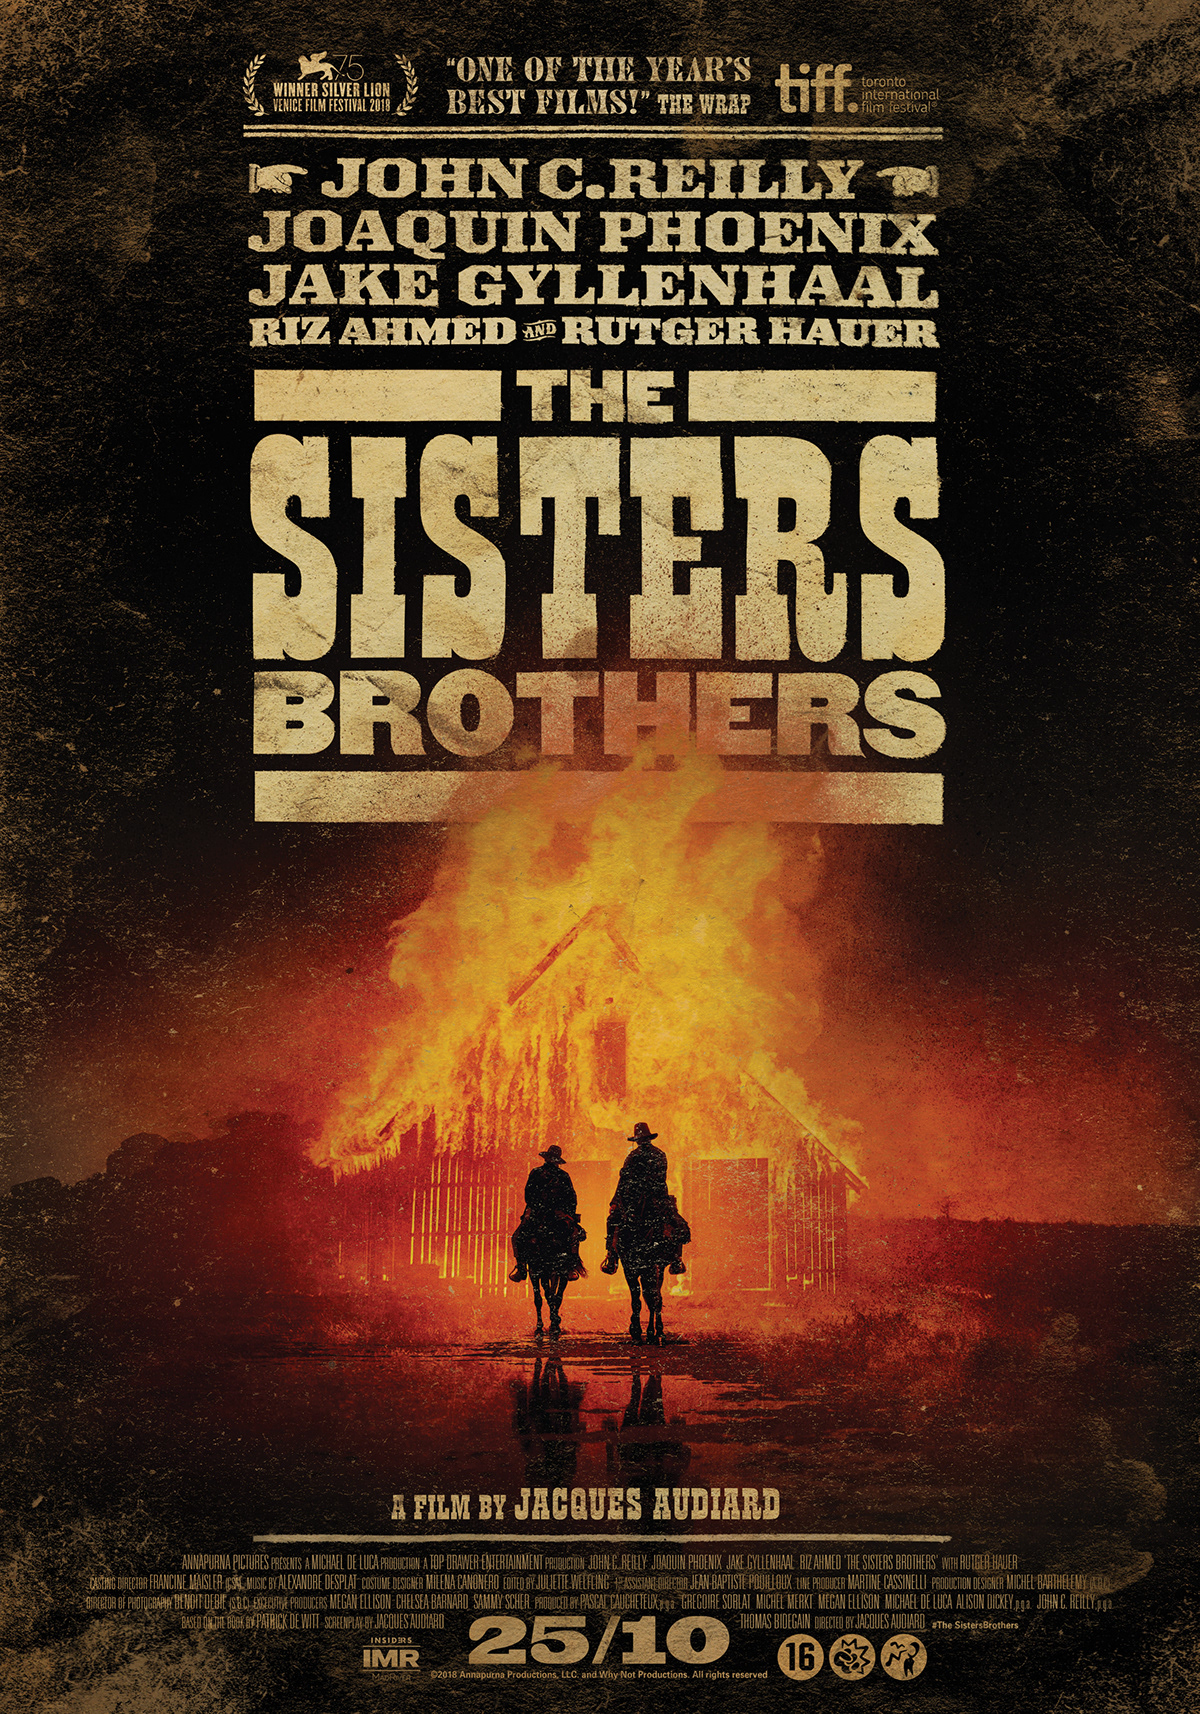 Sisters Full Movie •√ Sisters Brothers Movie Poster